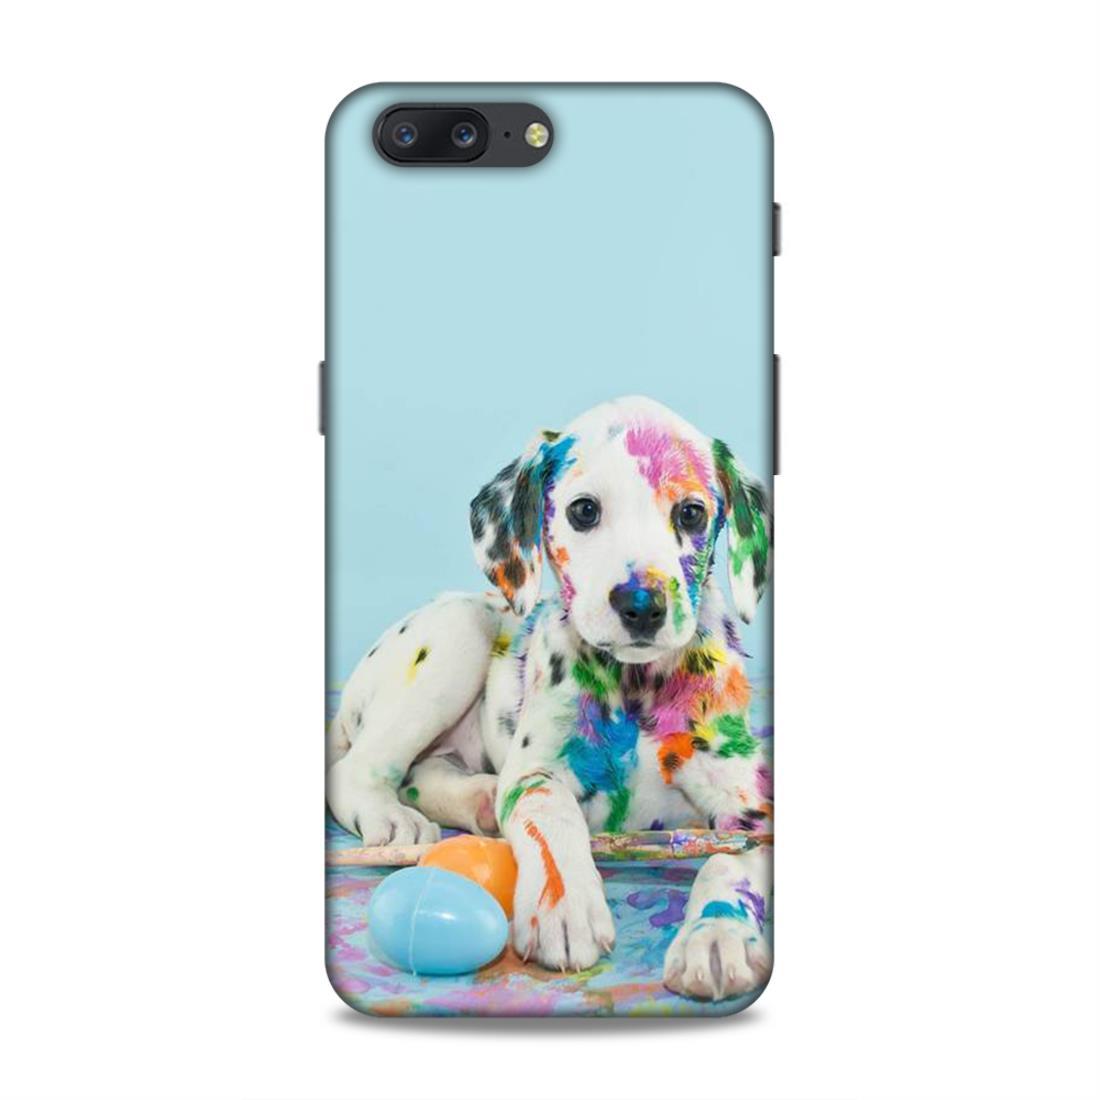 Cute Dog Lover OnePlus 5 Mobile Case Cover